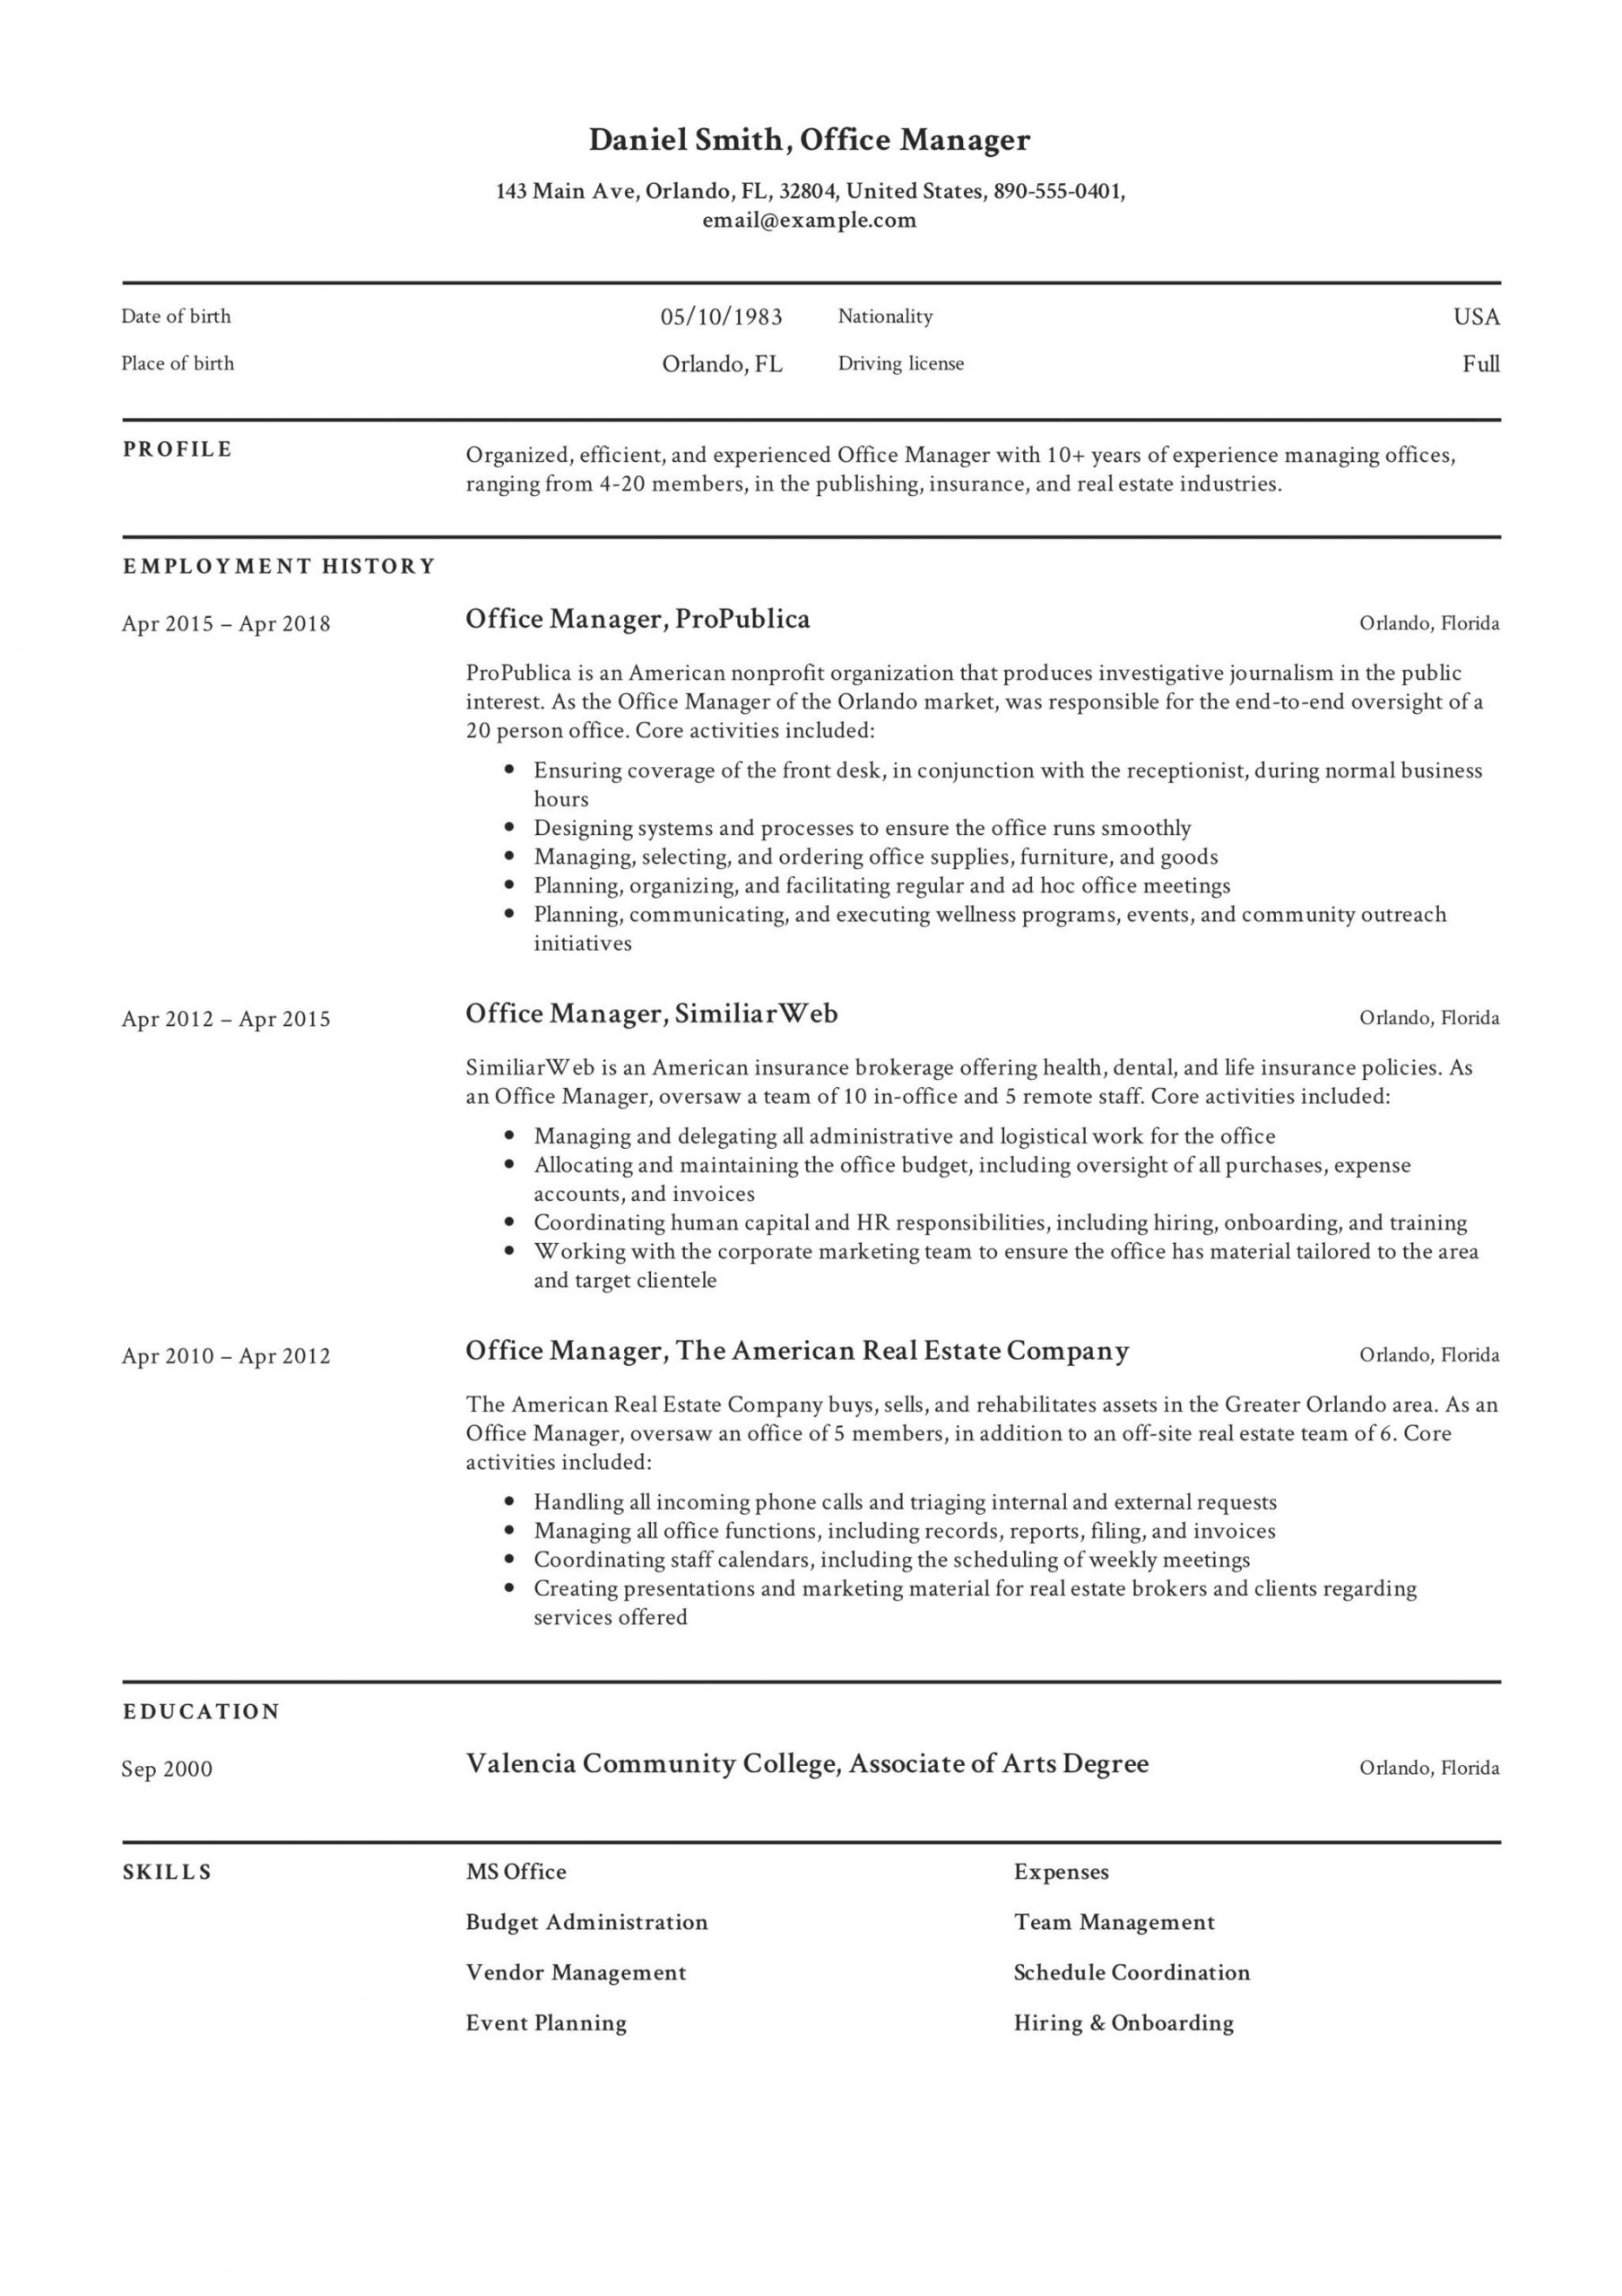 Sample Resume for Post Office Job Post Office Manager Resume October 2021